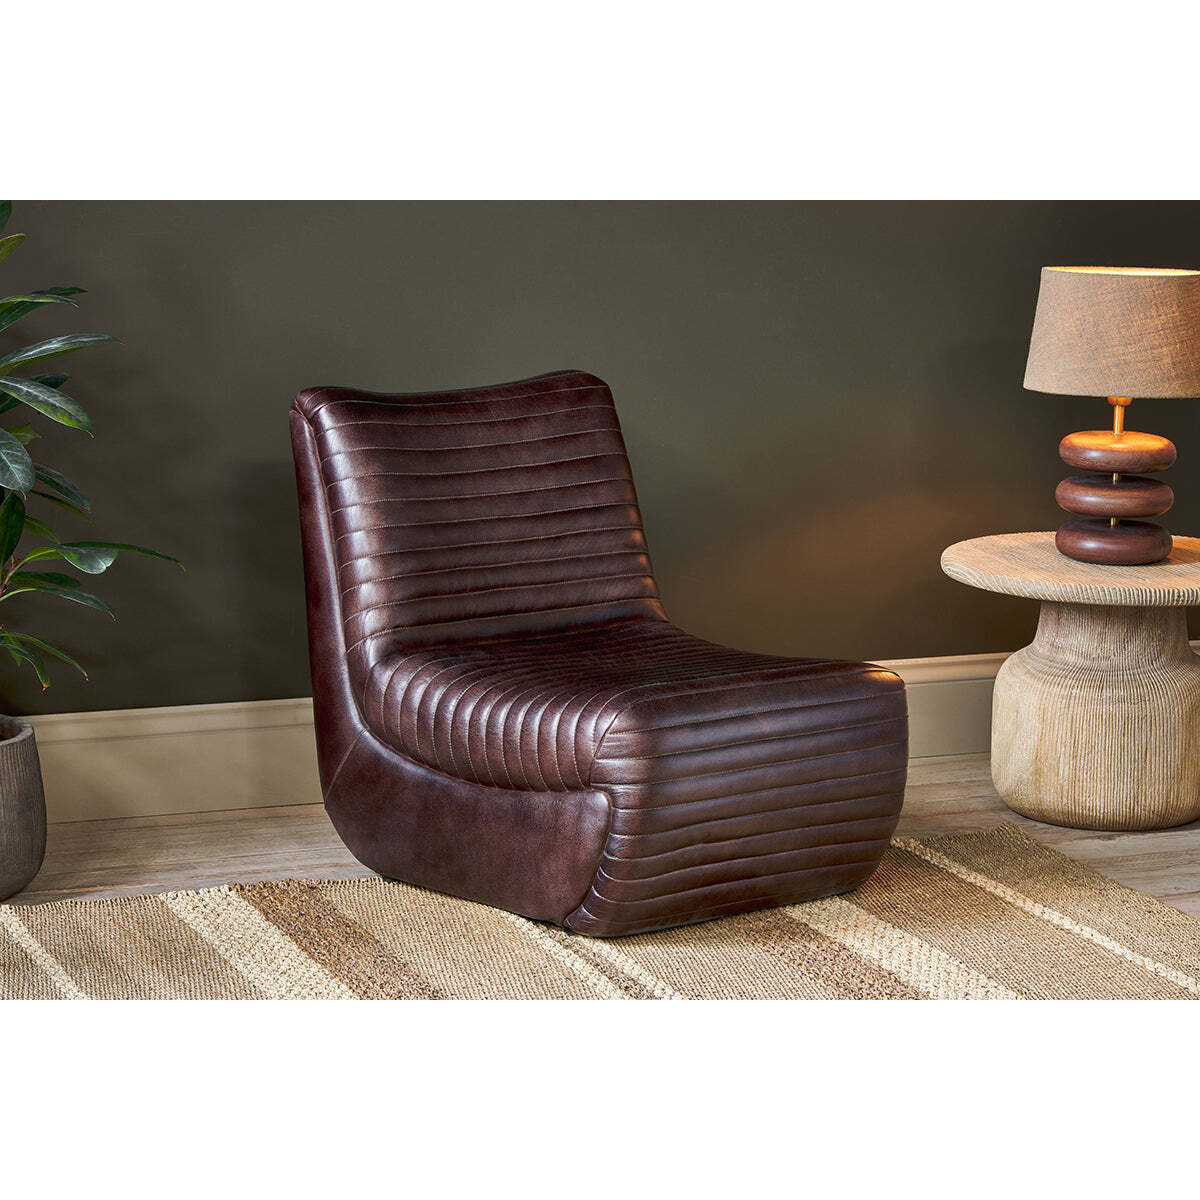 nkuku Navya Ribbed Leather Dining Chair - Dining Chairs Stools & Benches - Dark Brown